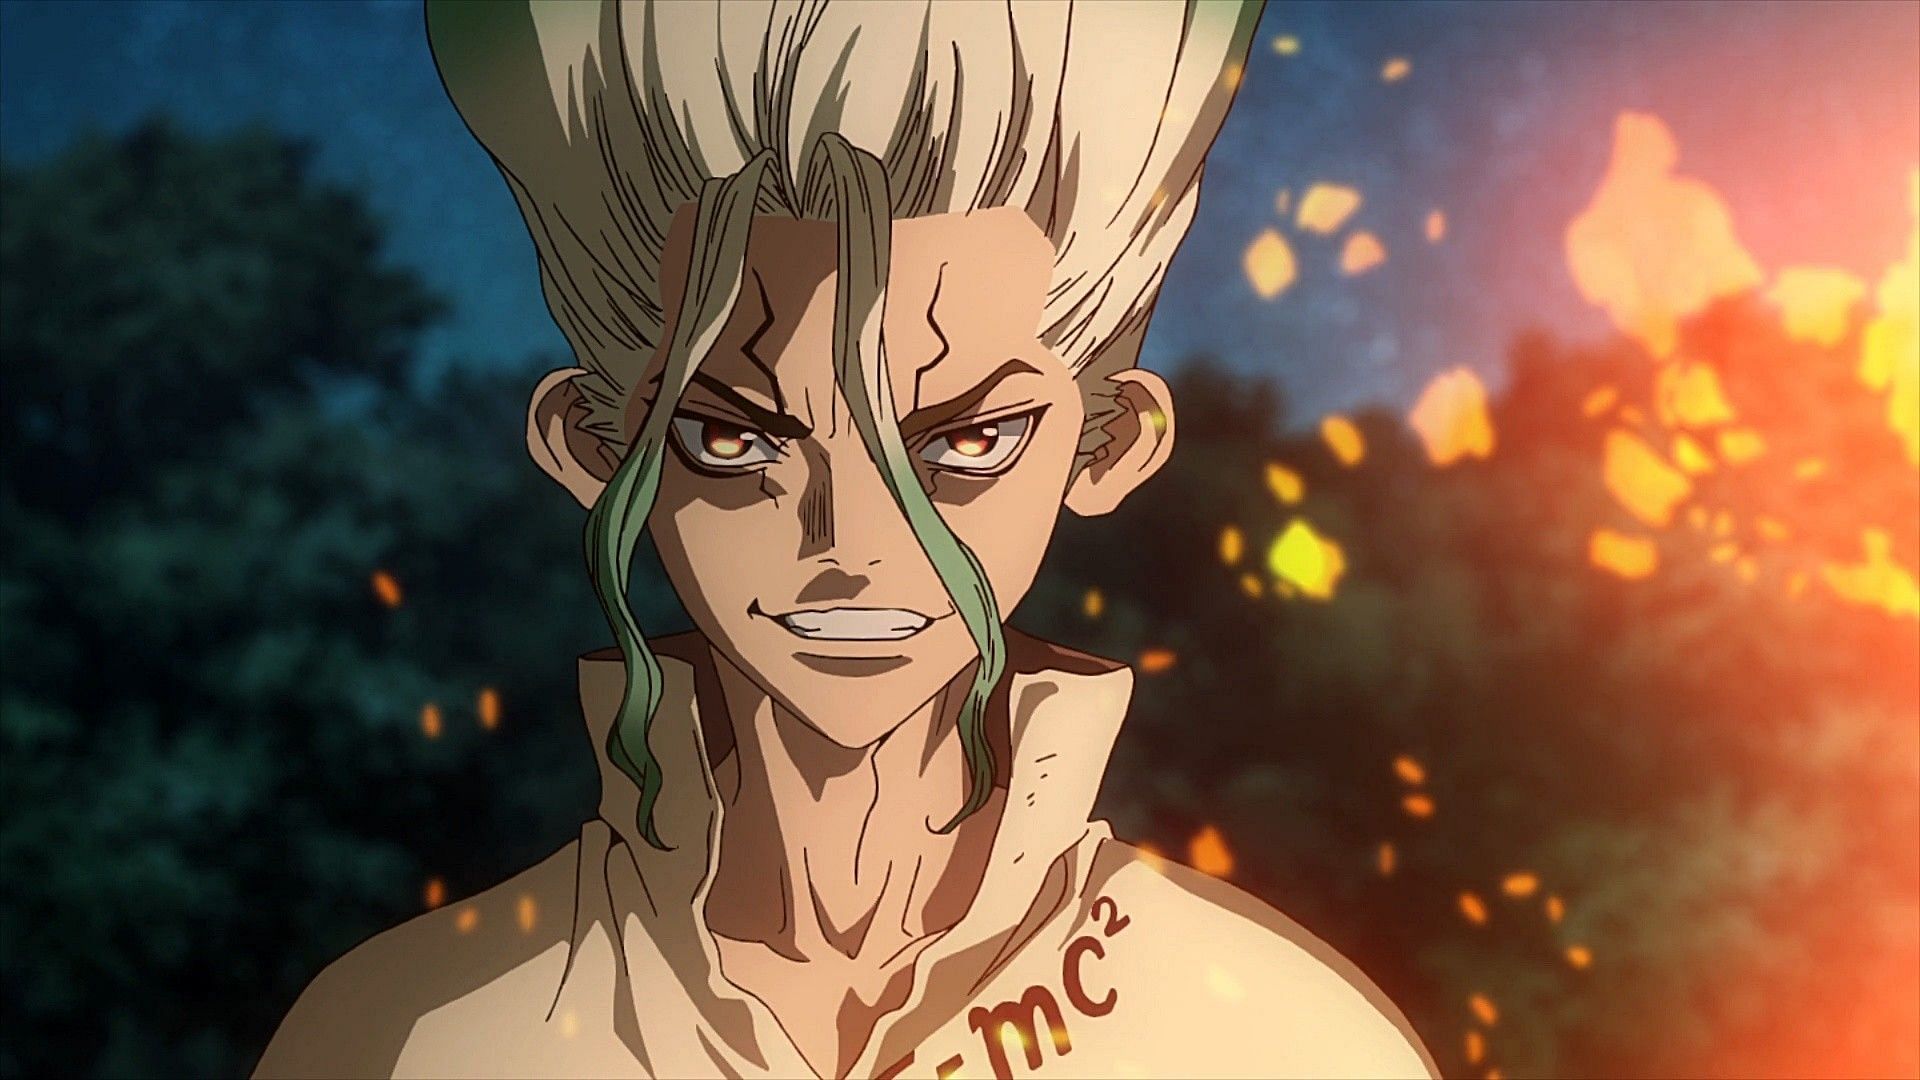 Dr. Stone: New World episode 2 set to air on April 13 - Release time &  preview - Hindustan Times